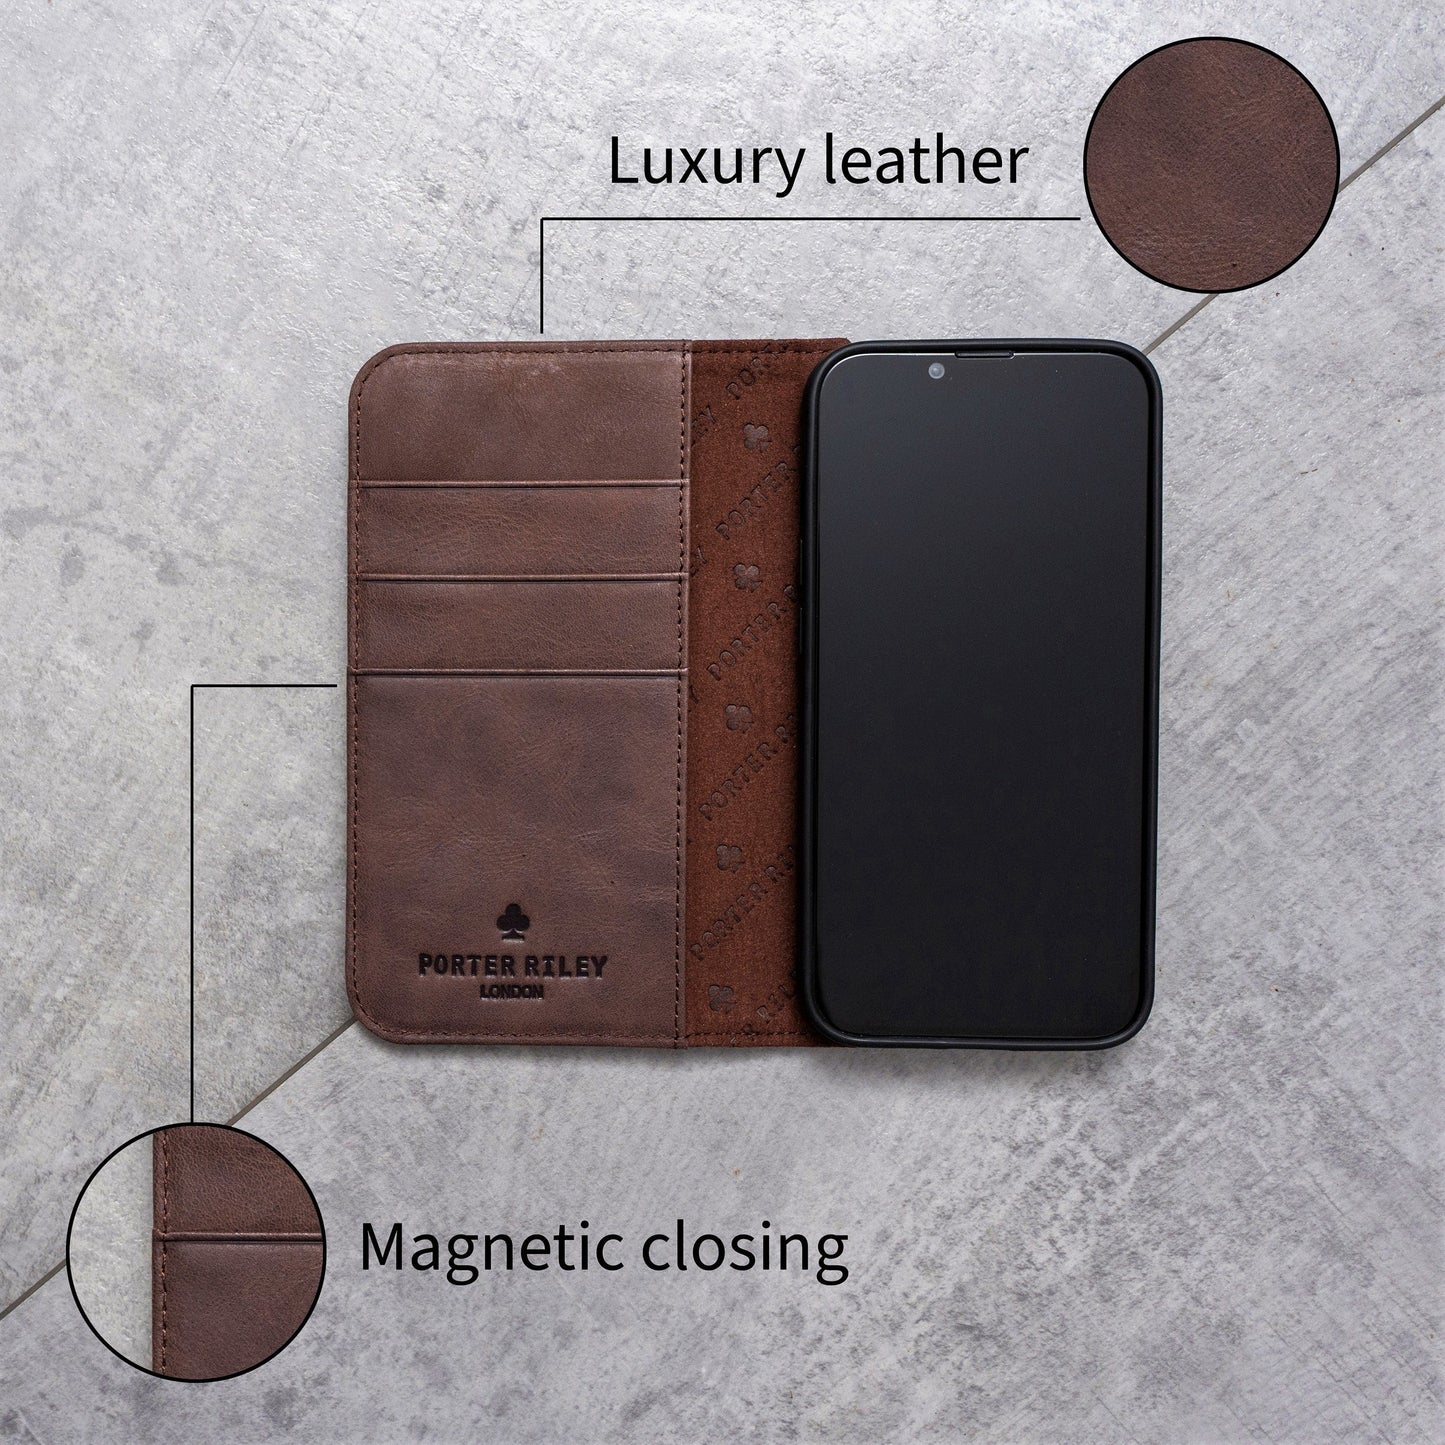 Samsung Galaxy S20 Ultra Leather Case. Premium Slim Genuine Leather Stand Case/Cover/Wallet (Chocolate Brown)